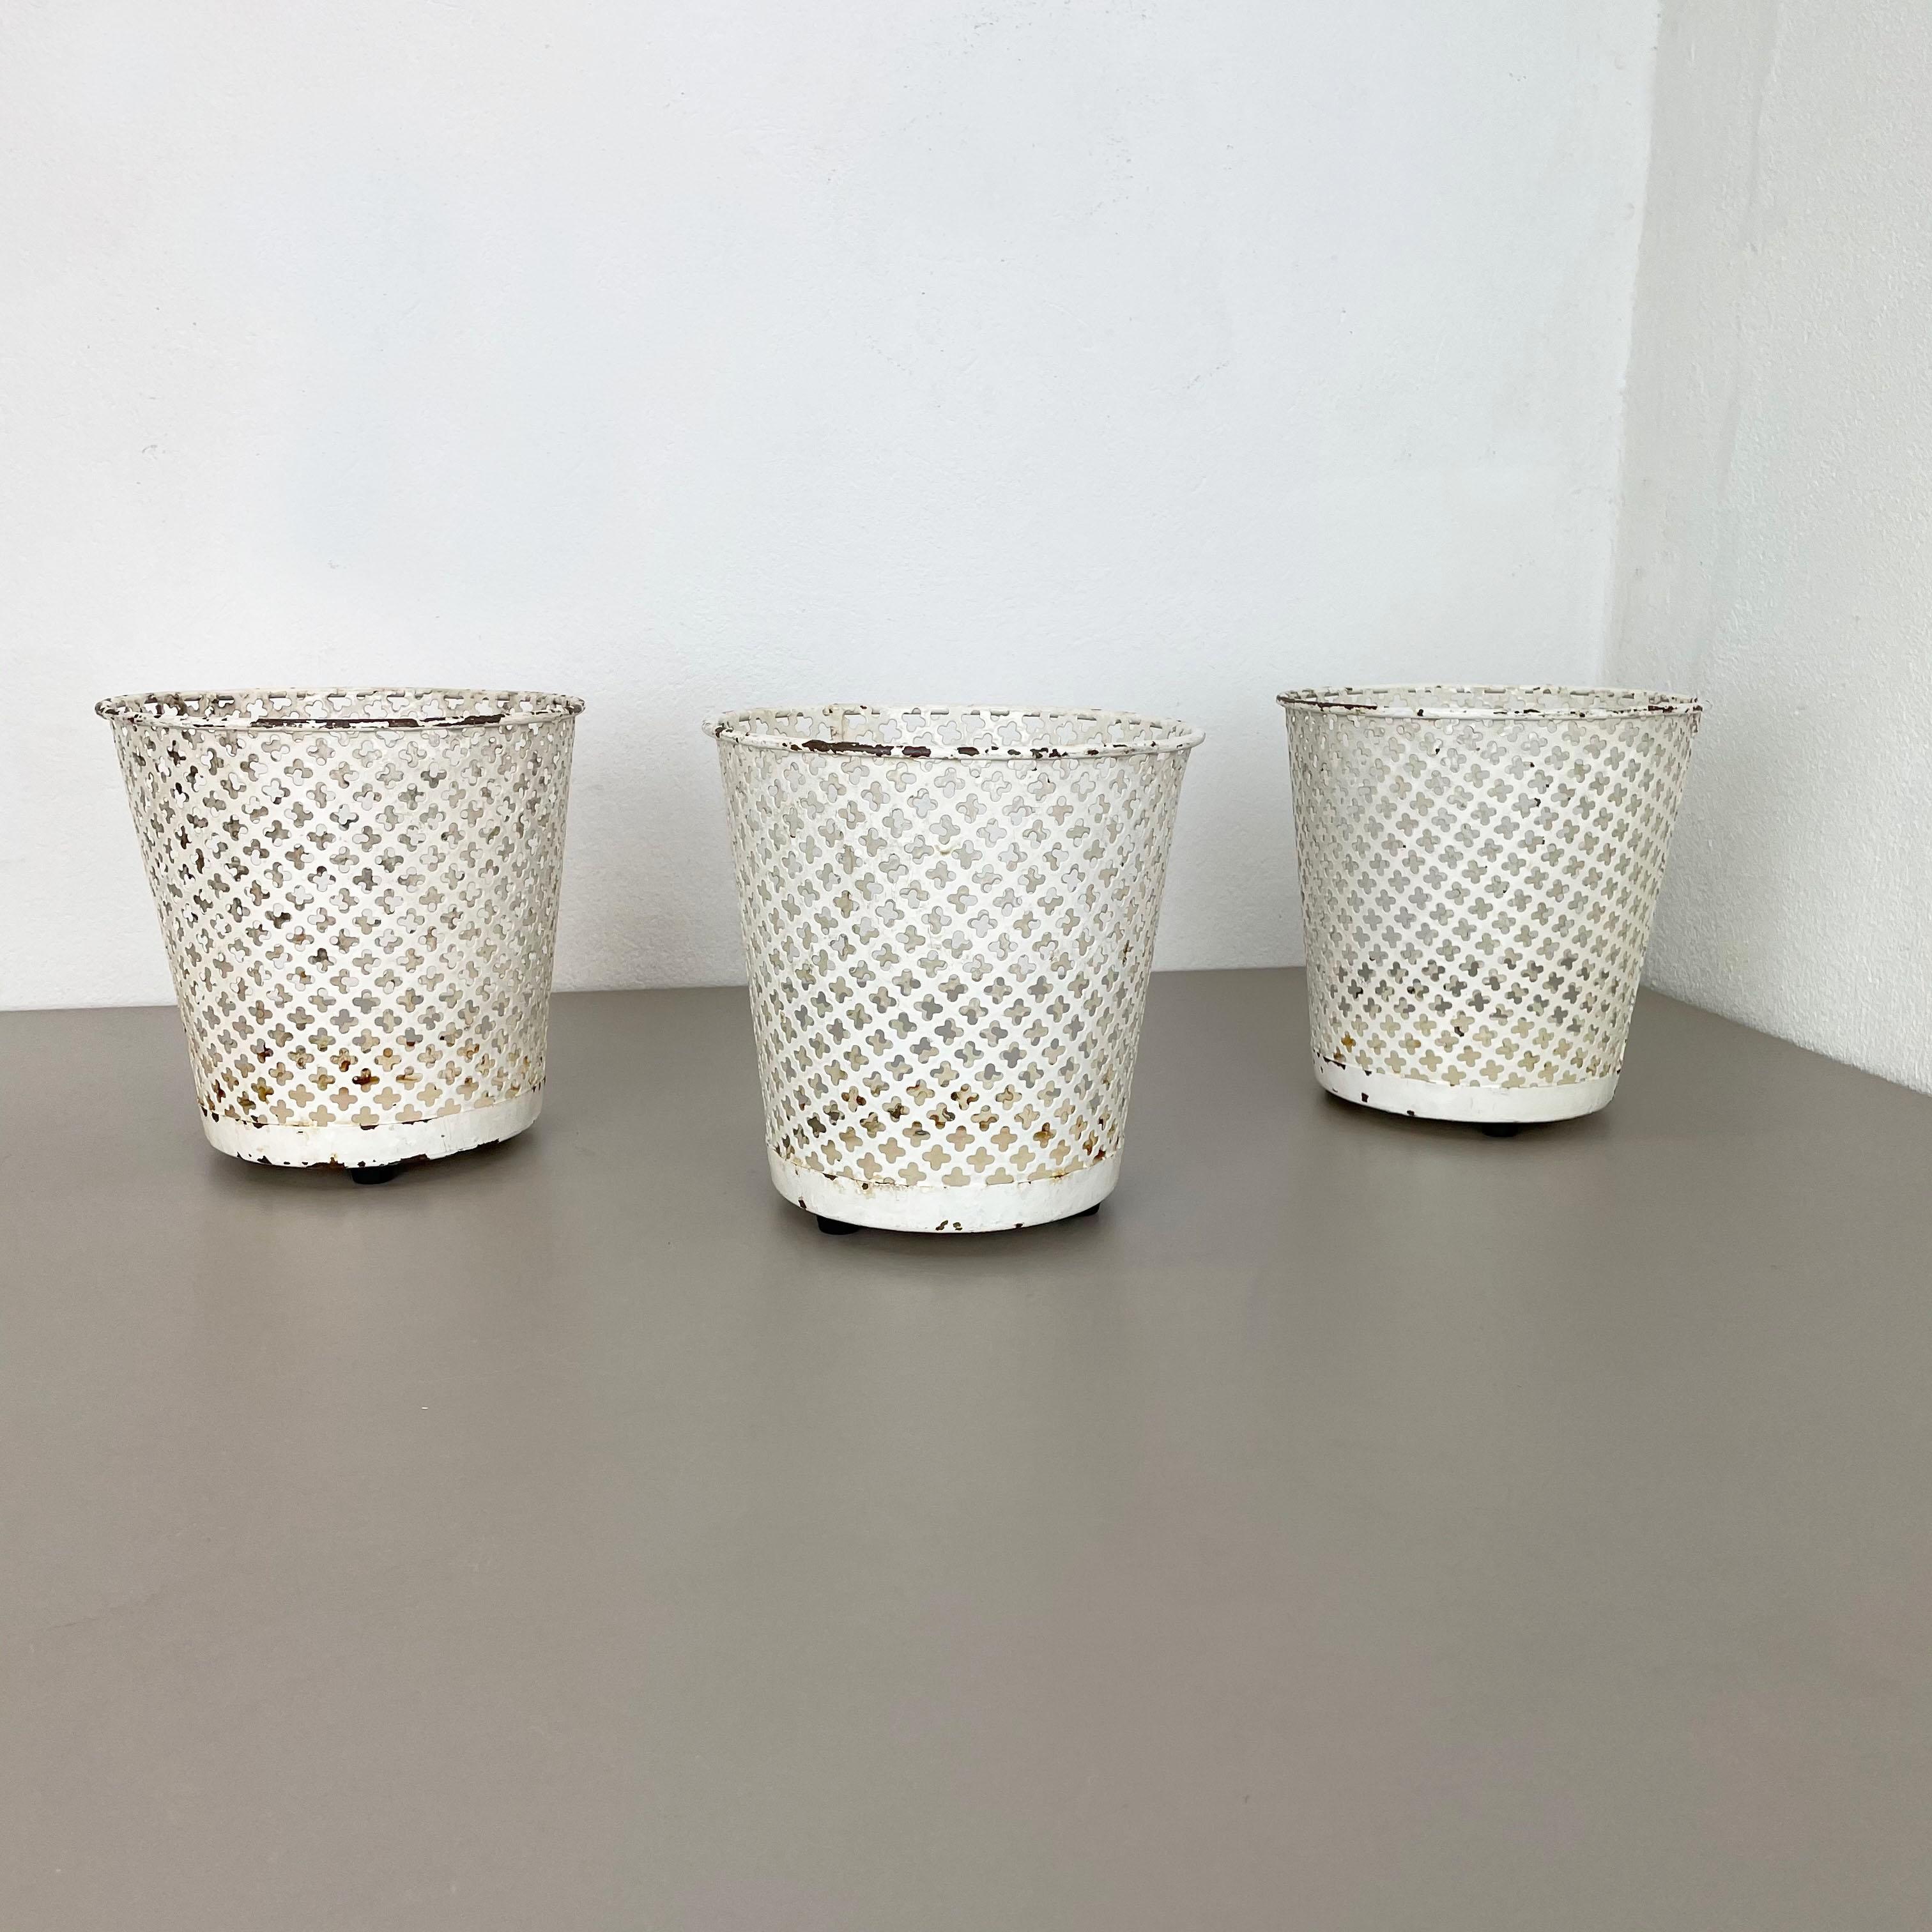 Article:

Set of three modernist metal plant pots.


Design:

attributed to Mathieu Mategot


Origin: 

France


Description:

This original set of three modernist plant pots vases was produced in the 1950s in France. its is